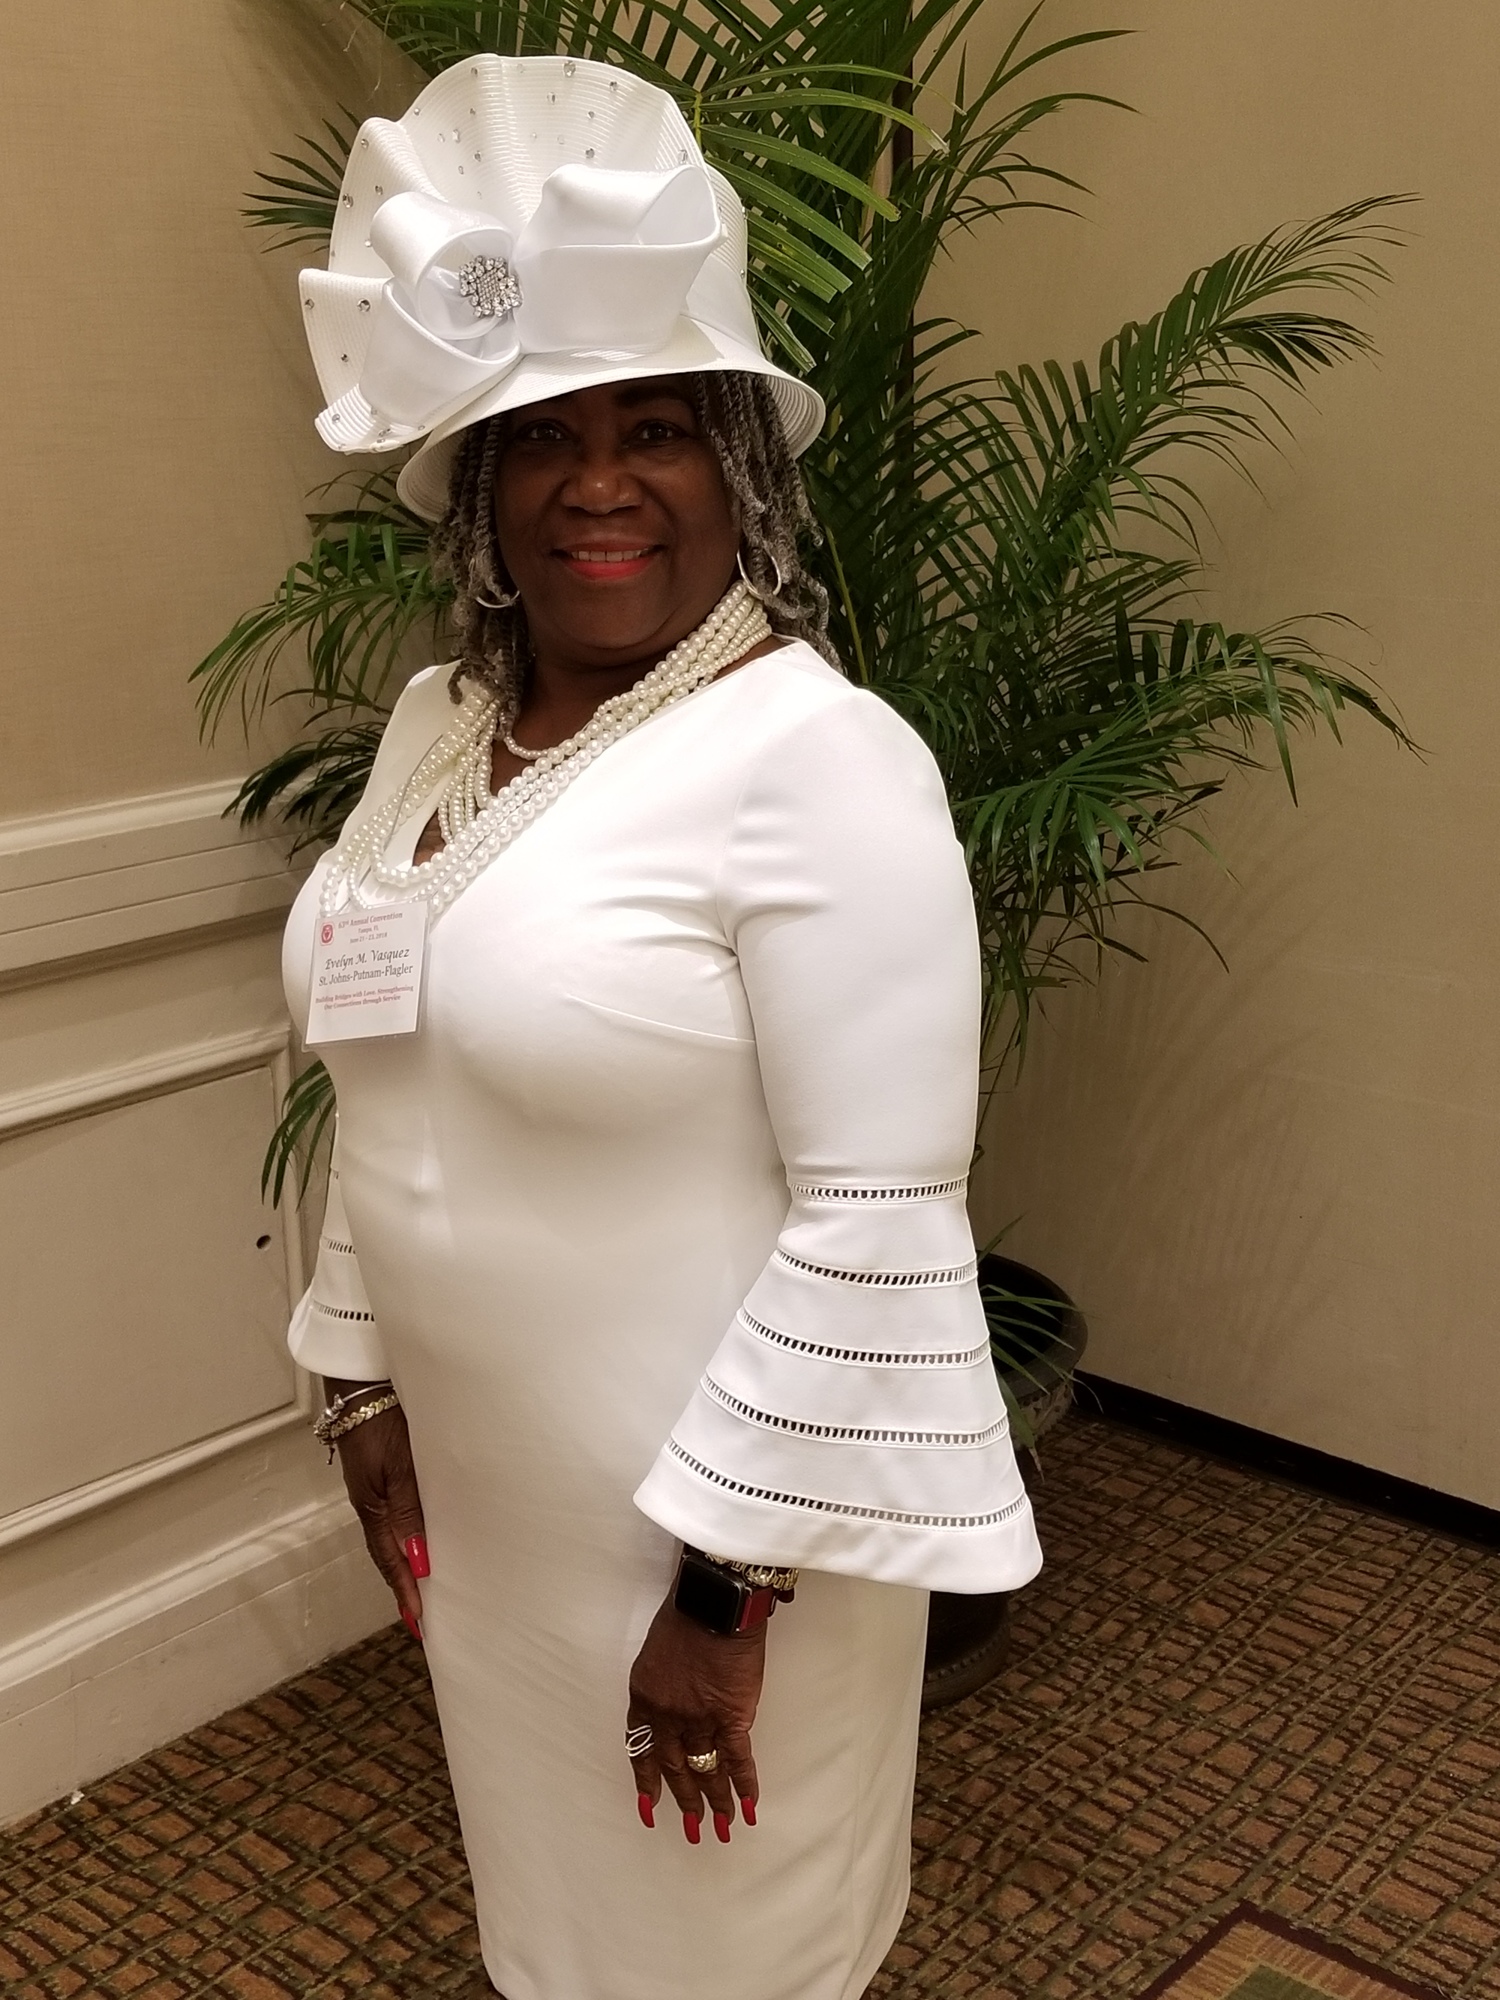 Charmette Evelyn S. Vazquez, of Palm Coast, is the 2018 recipient of the Gwendolyn Baker Rodgers Spirit Award. Photo courtesy of Deborah Pelham